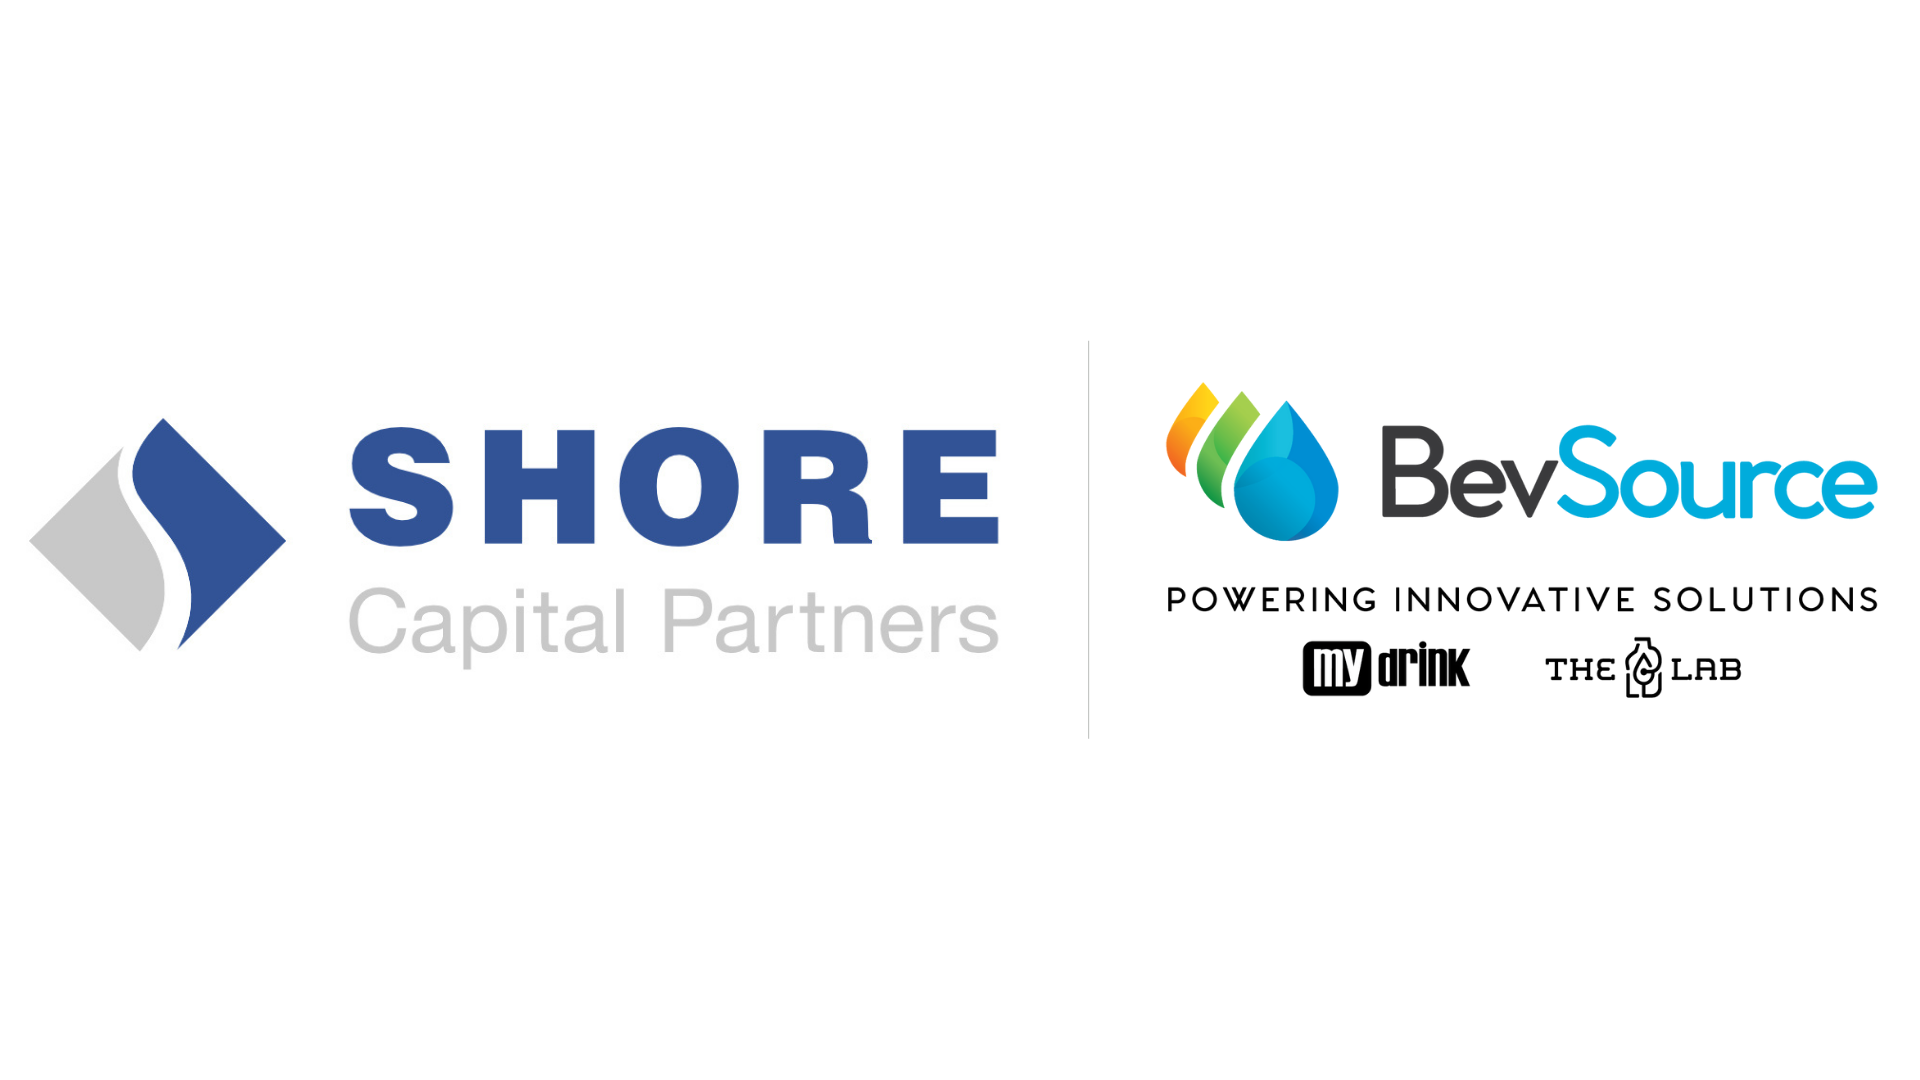 Shore Capital Partners Announces Partnership With BevSource